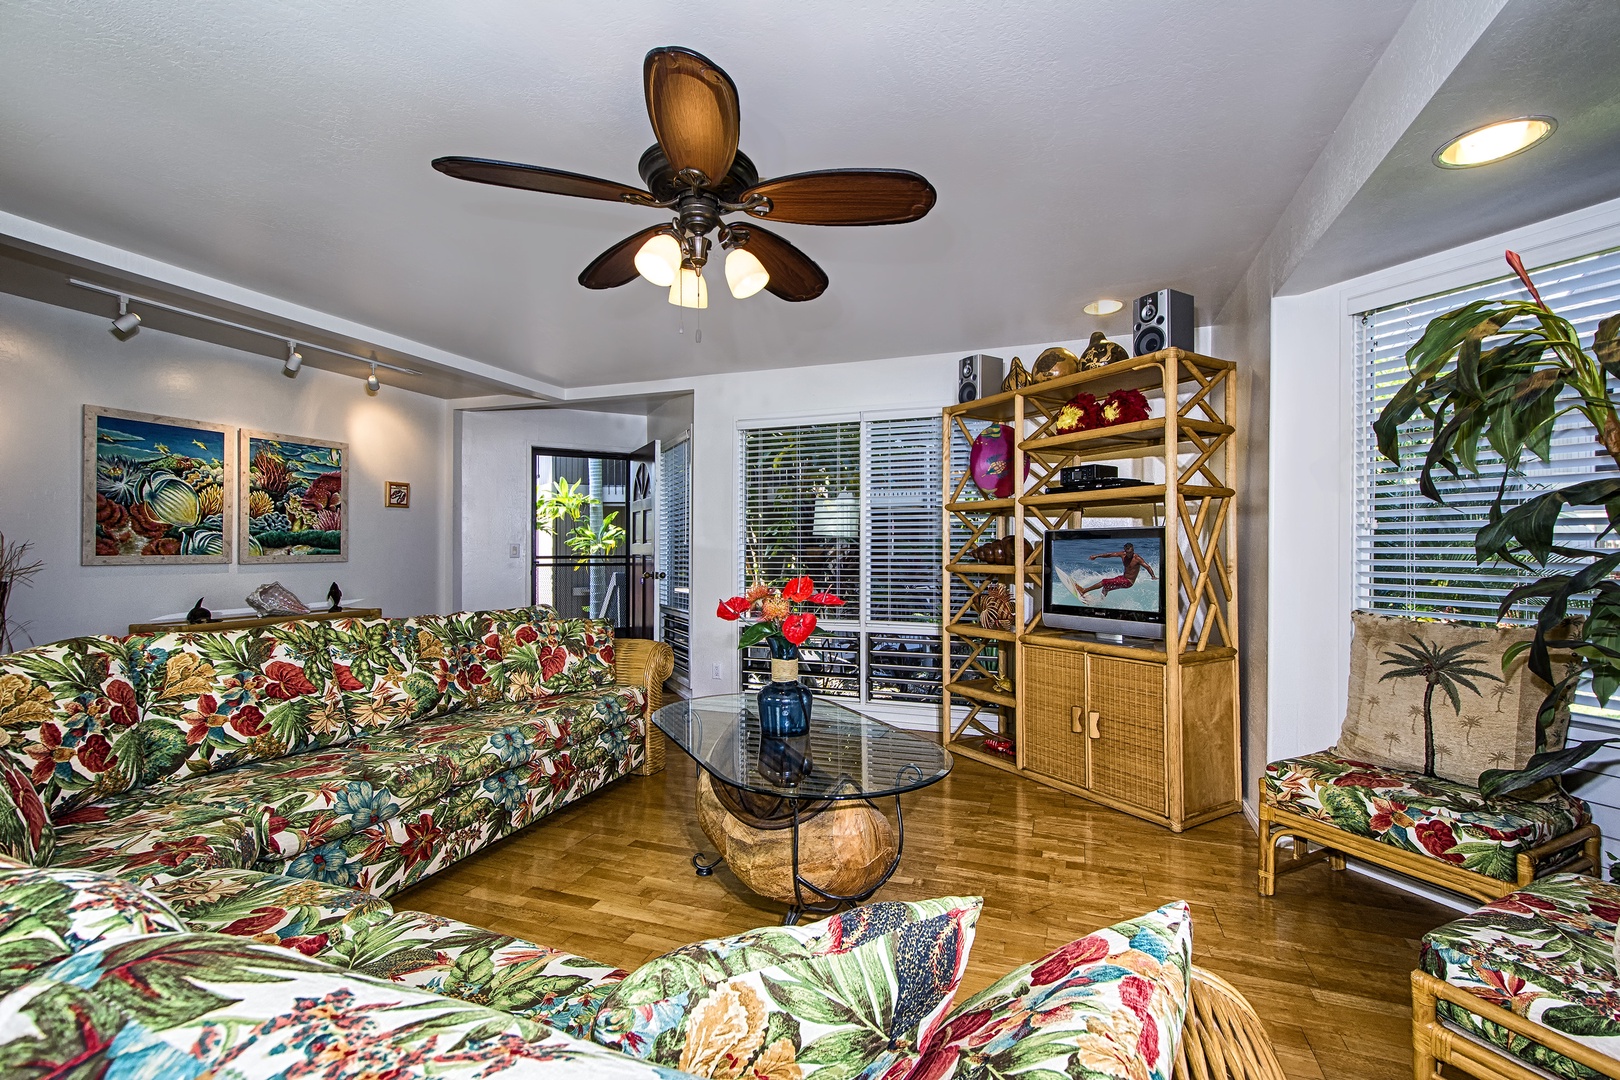 Kailua Kona Vacation Rentals, Kanaloa at Kona 701 - This  1,700 sq. ft. two-bedroom, two-bathroom vacation rental with garden views is the ideal place to experience the beauty of Hawaii